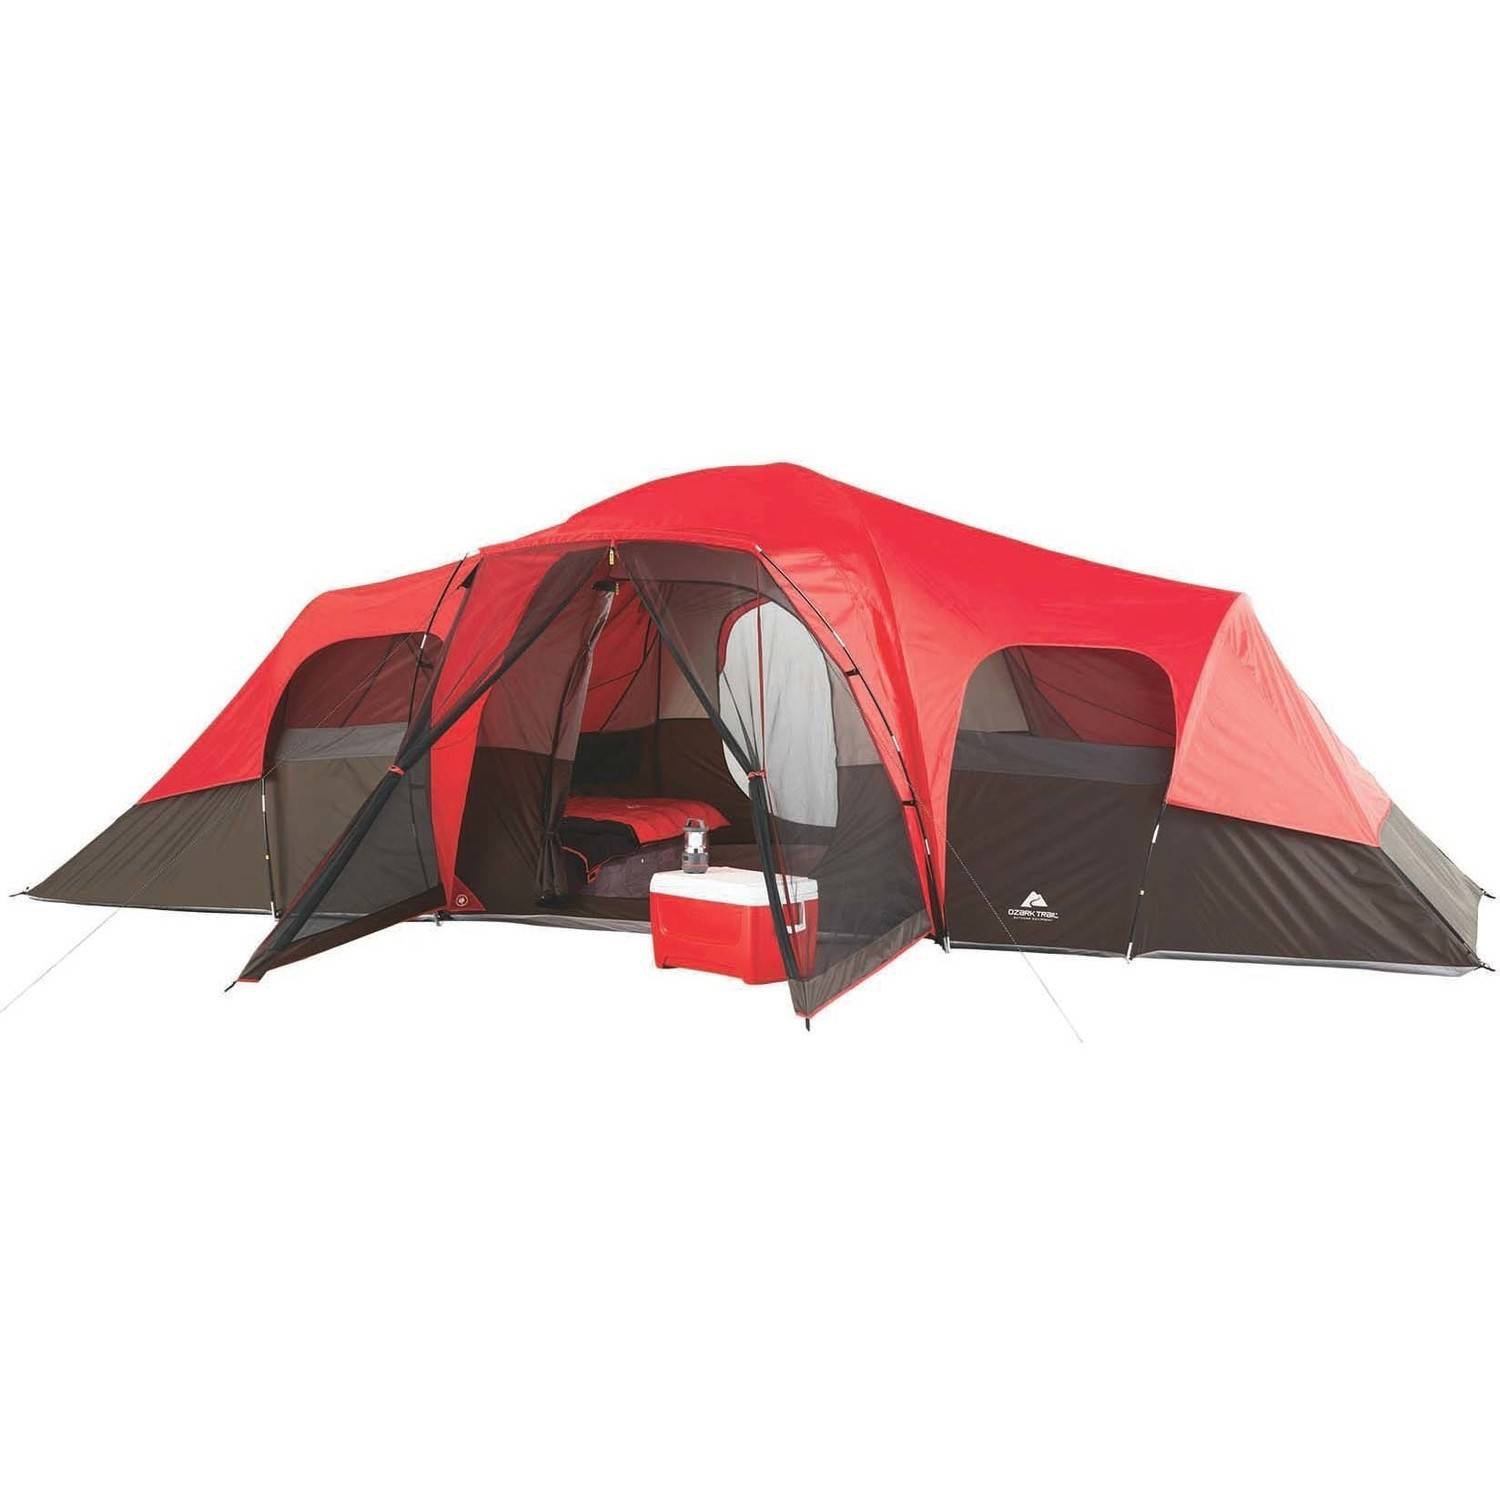 Ozark Trail, 21' x 15’ x 78” 10-Person Family Camping Tent - image 1 of 11